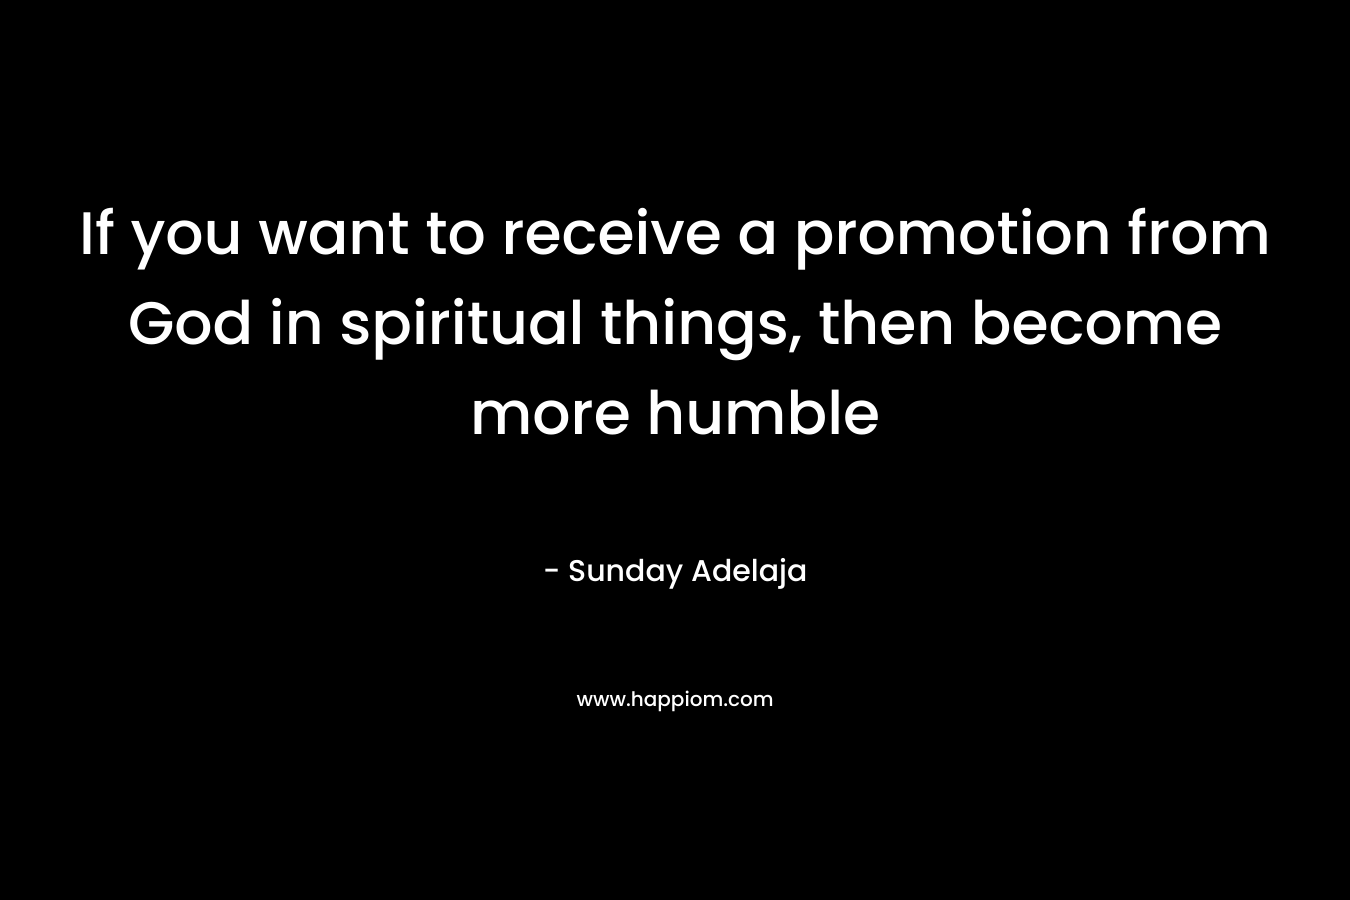 If you want to receive a promotion from God in spiritual things, then become more humble